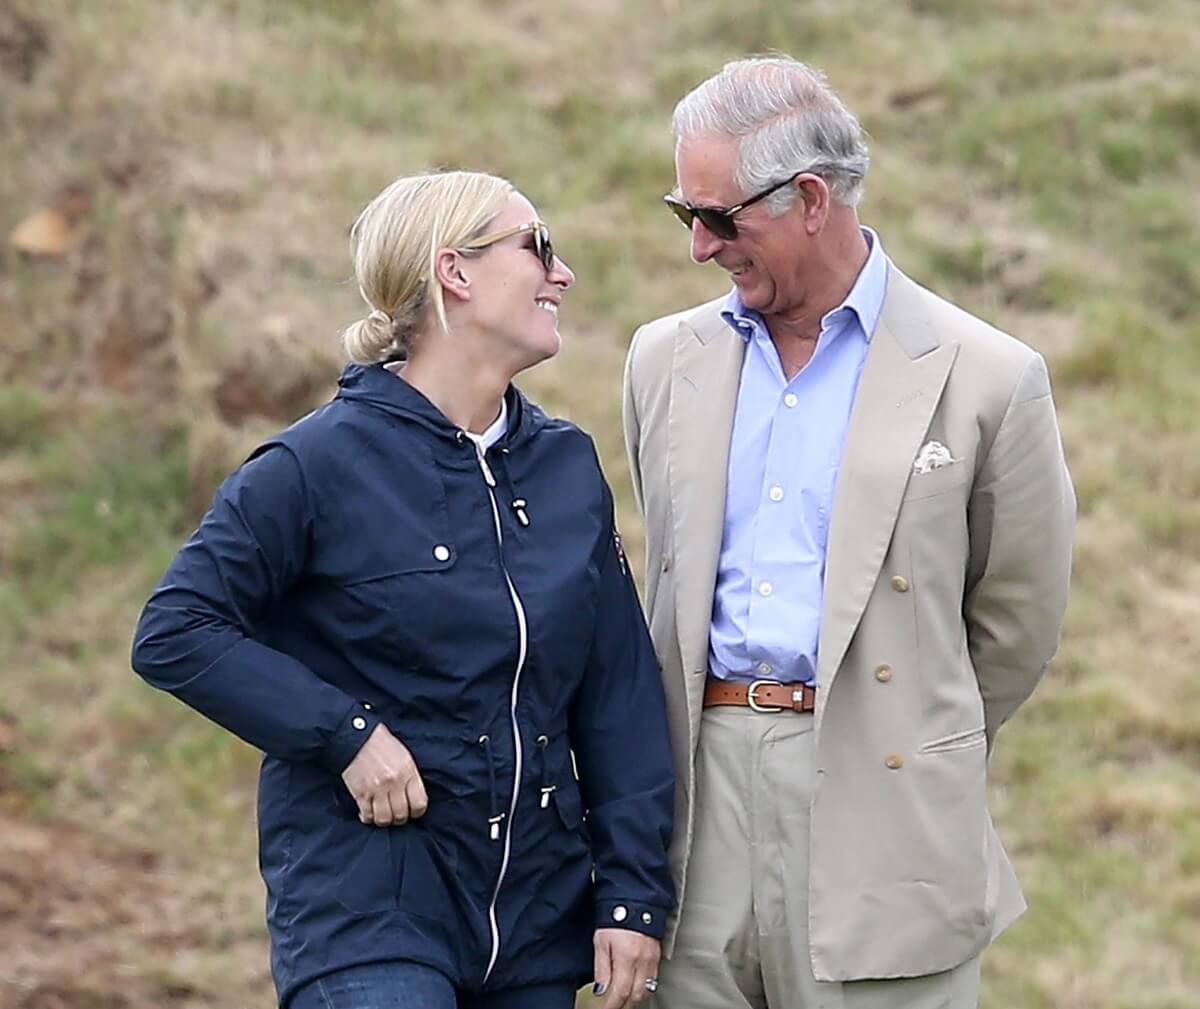 King Charles III and Zara Tindall attend the Gigaset Charity Polo Match at Beaufort Polo Club